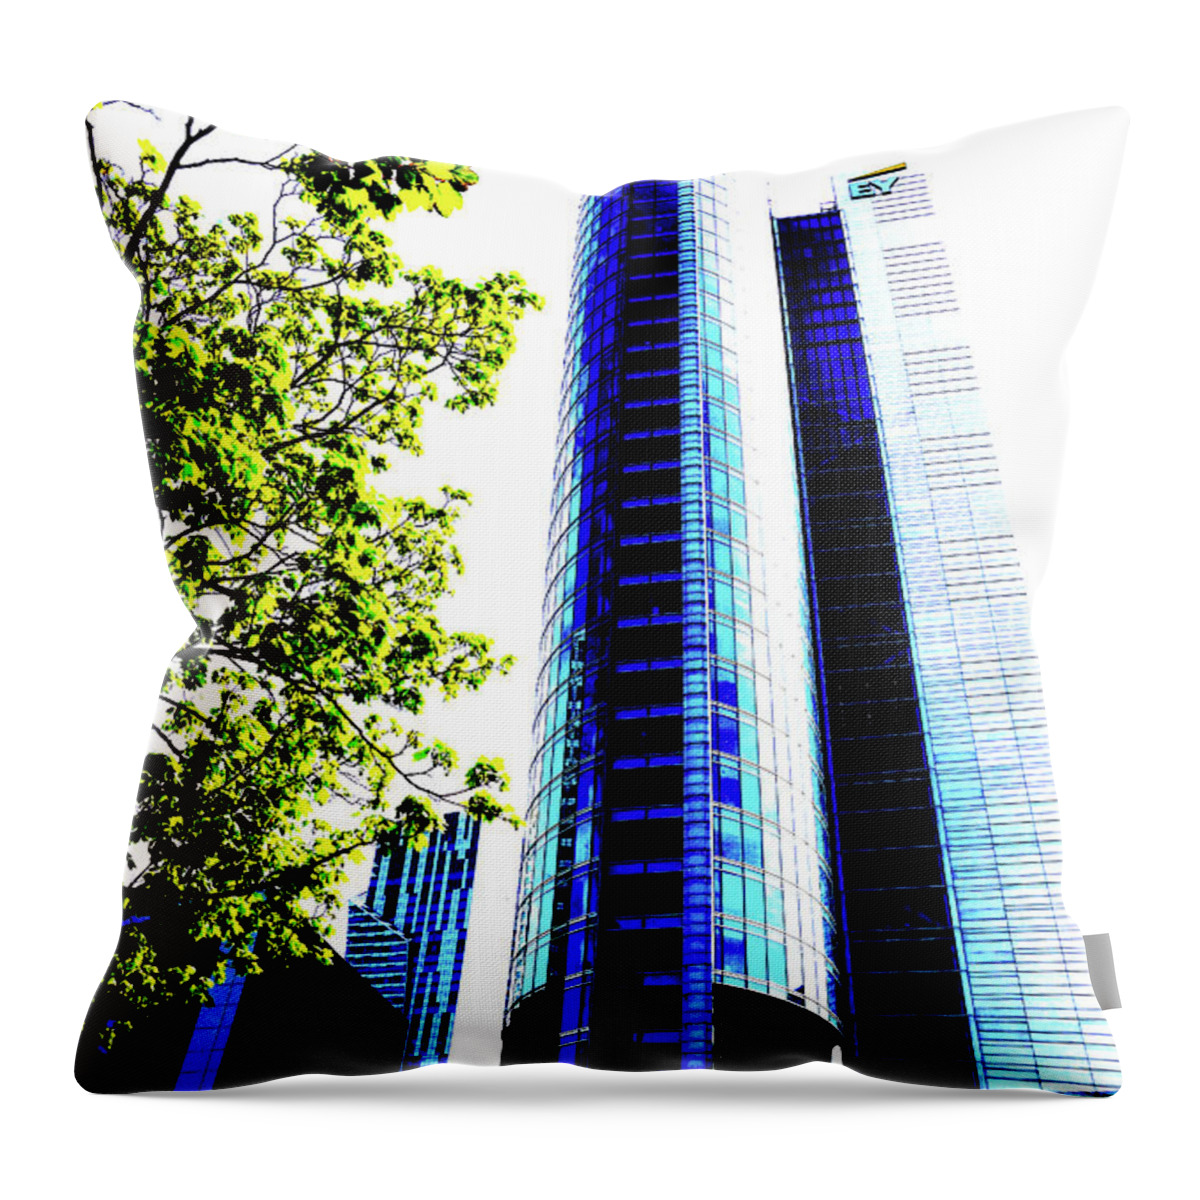 Skyscraper Throw Pillow featuring the photograph Skyscraper And Tree In Warsaw, Poland by John Siest